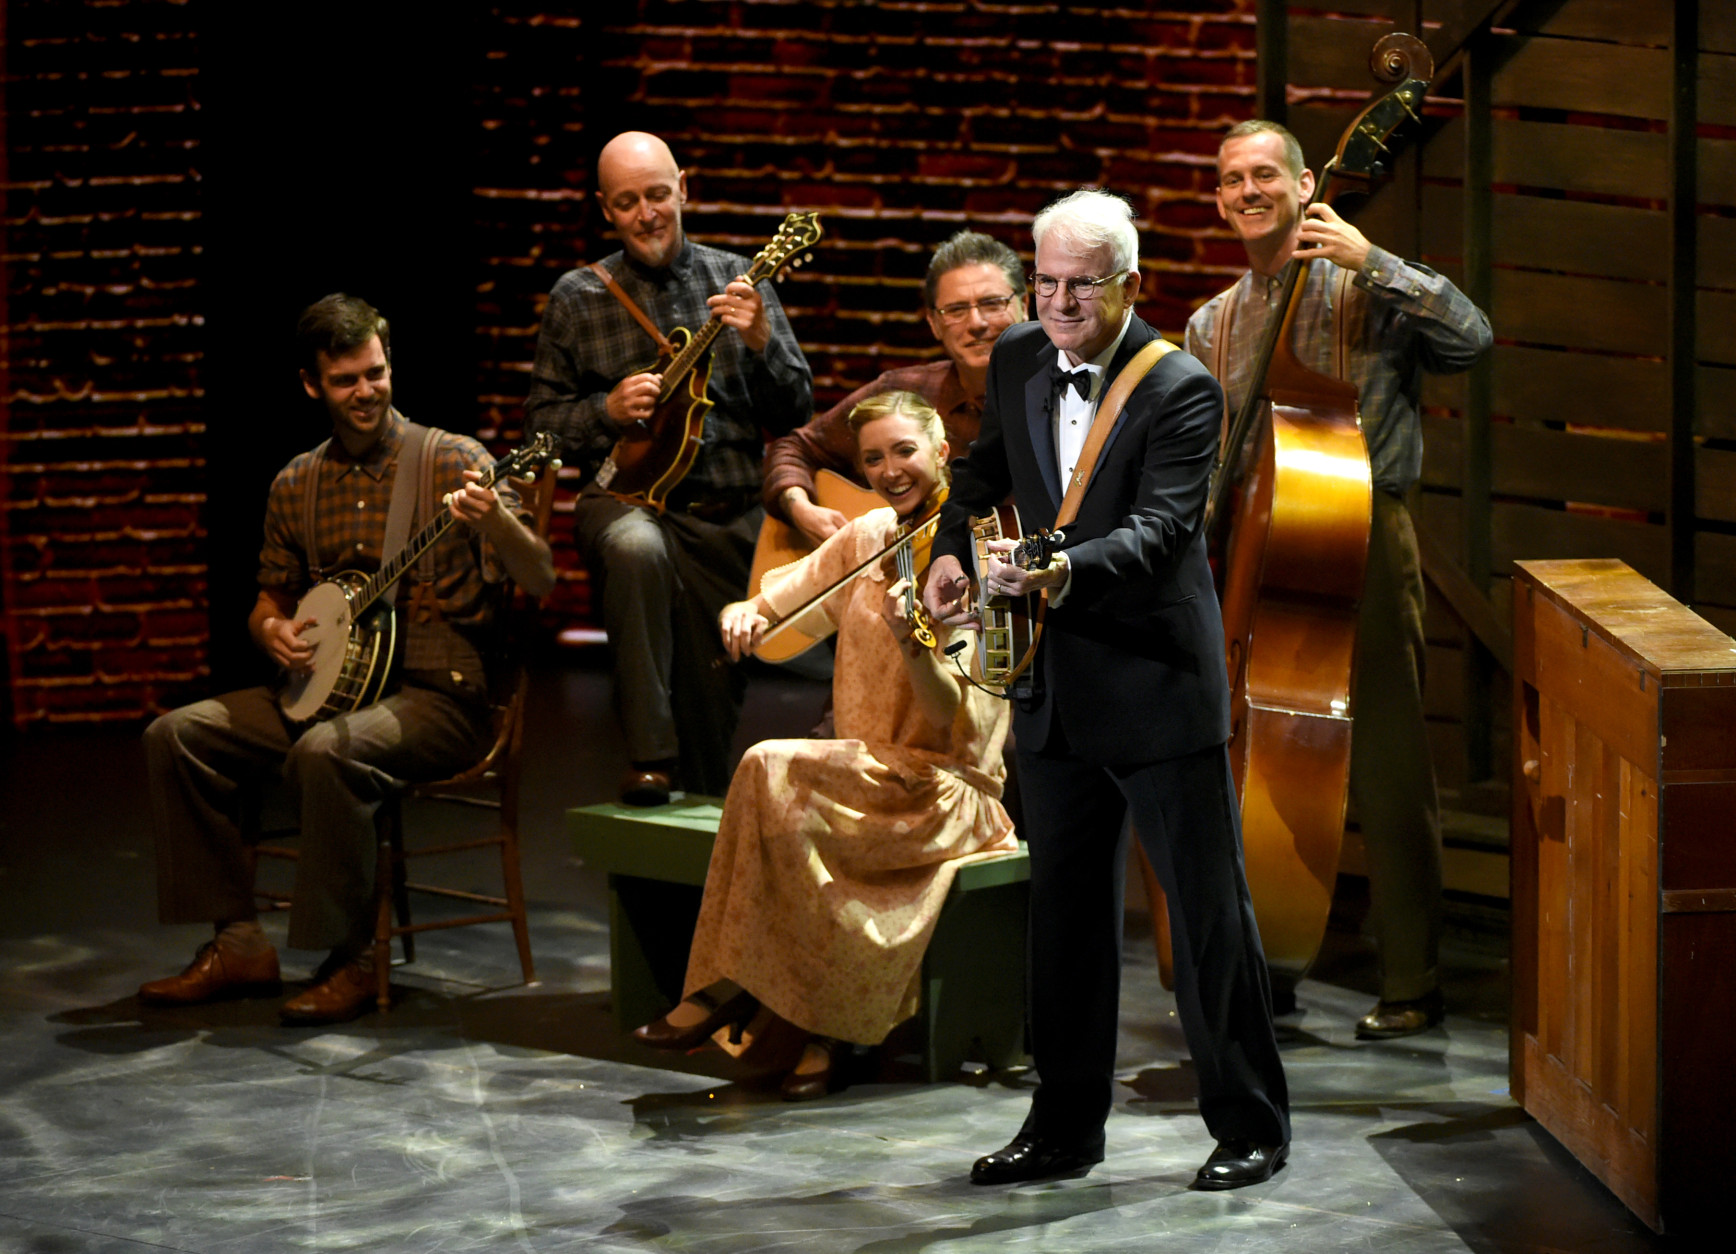 Steve Martin and the cast of Bright Star perform at the Tony Awards at the Beacon Theatre on Sunday, June 12, 2016, in New York. (Photo by Evan Agostini/Invision/AP)